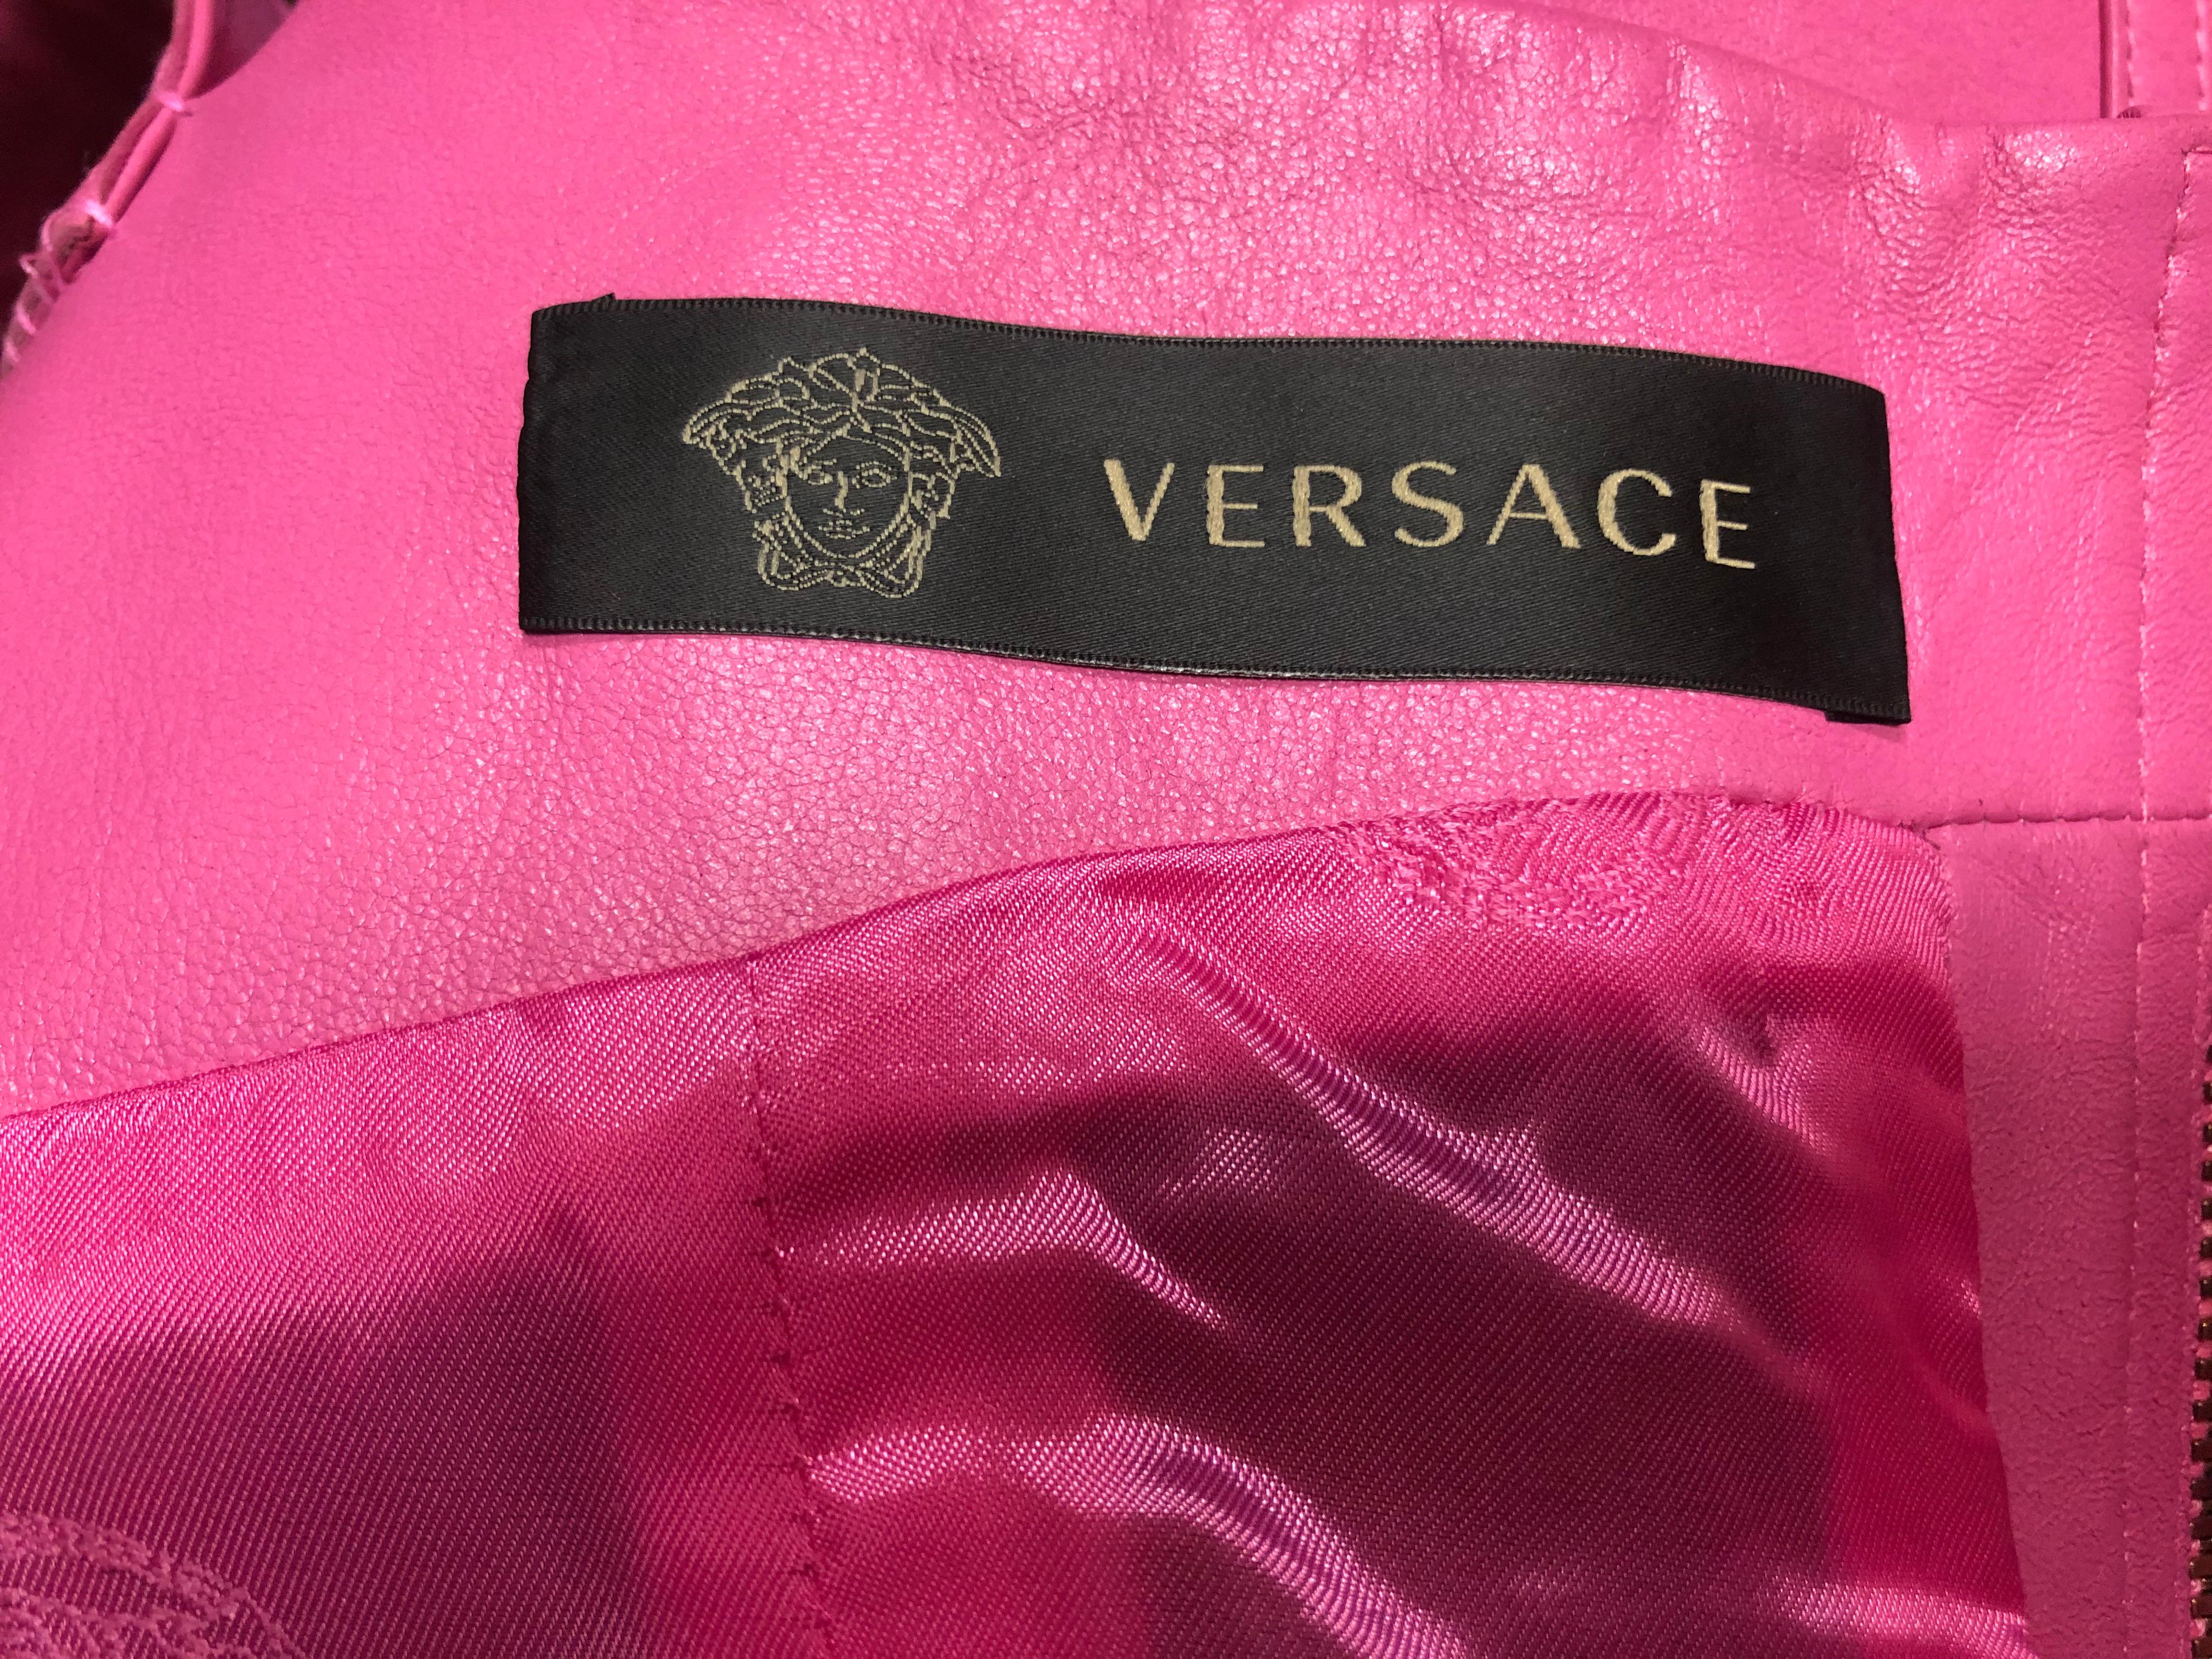 Resort 2013 look # 9 NEW VERSACE PINK LEATHER MINI DRESS 38 - 2 For Sale 7